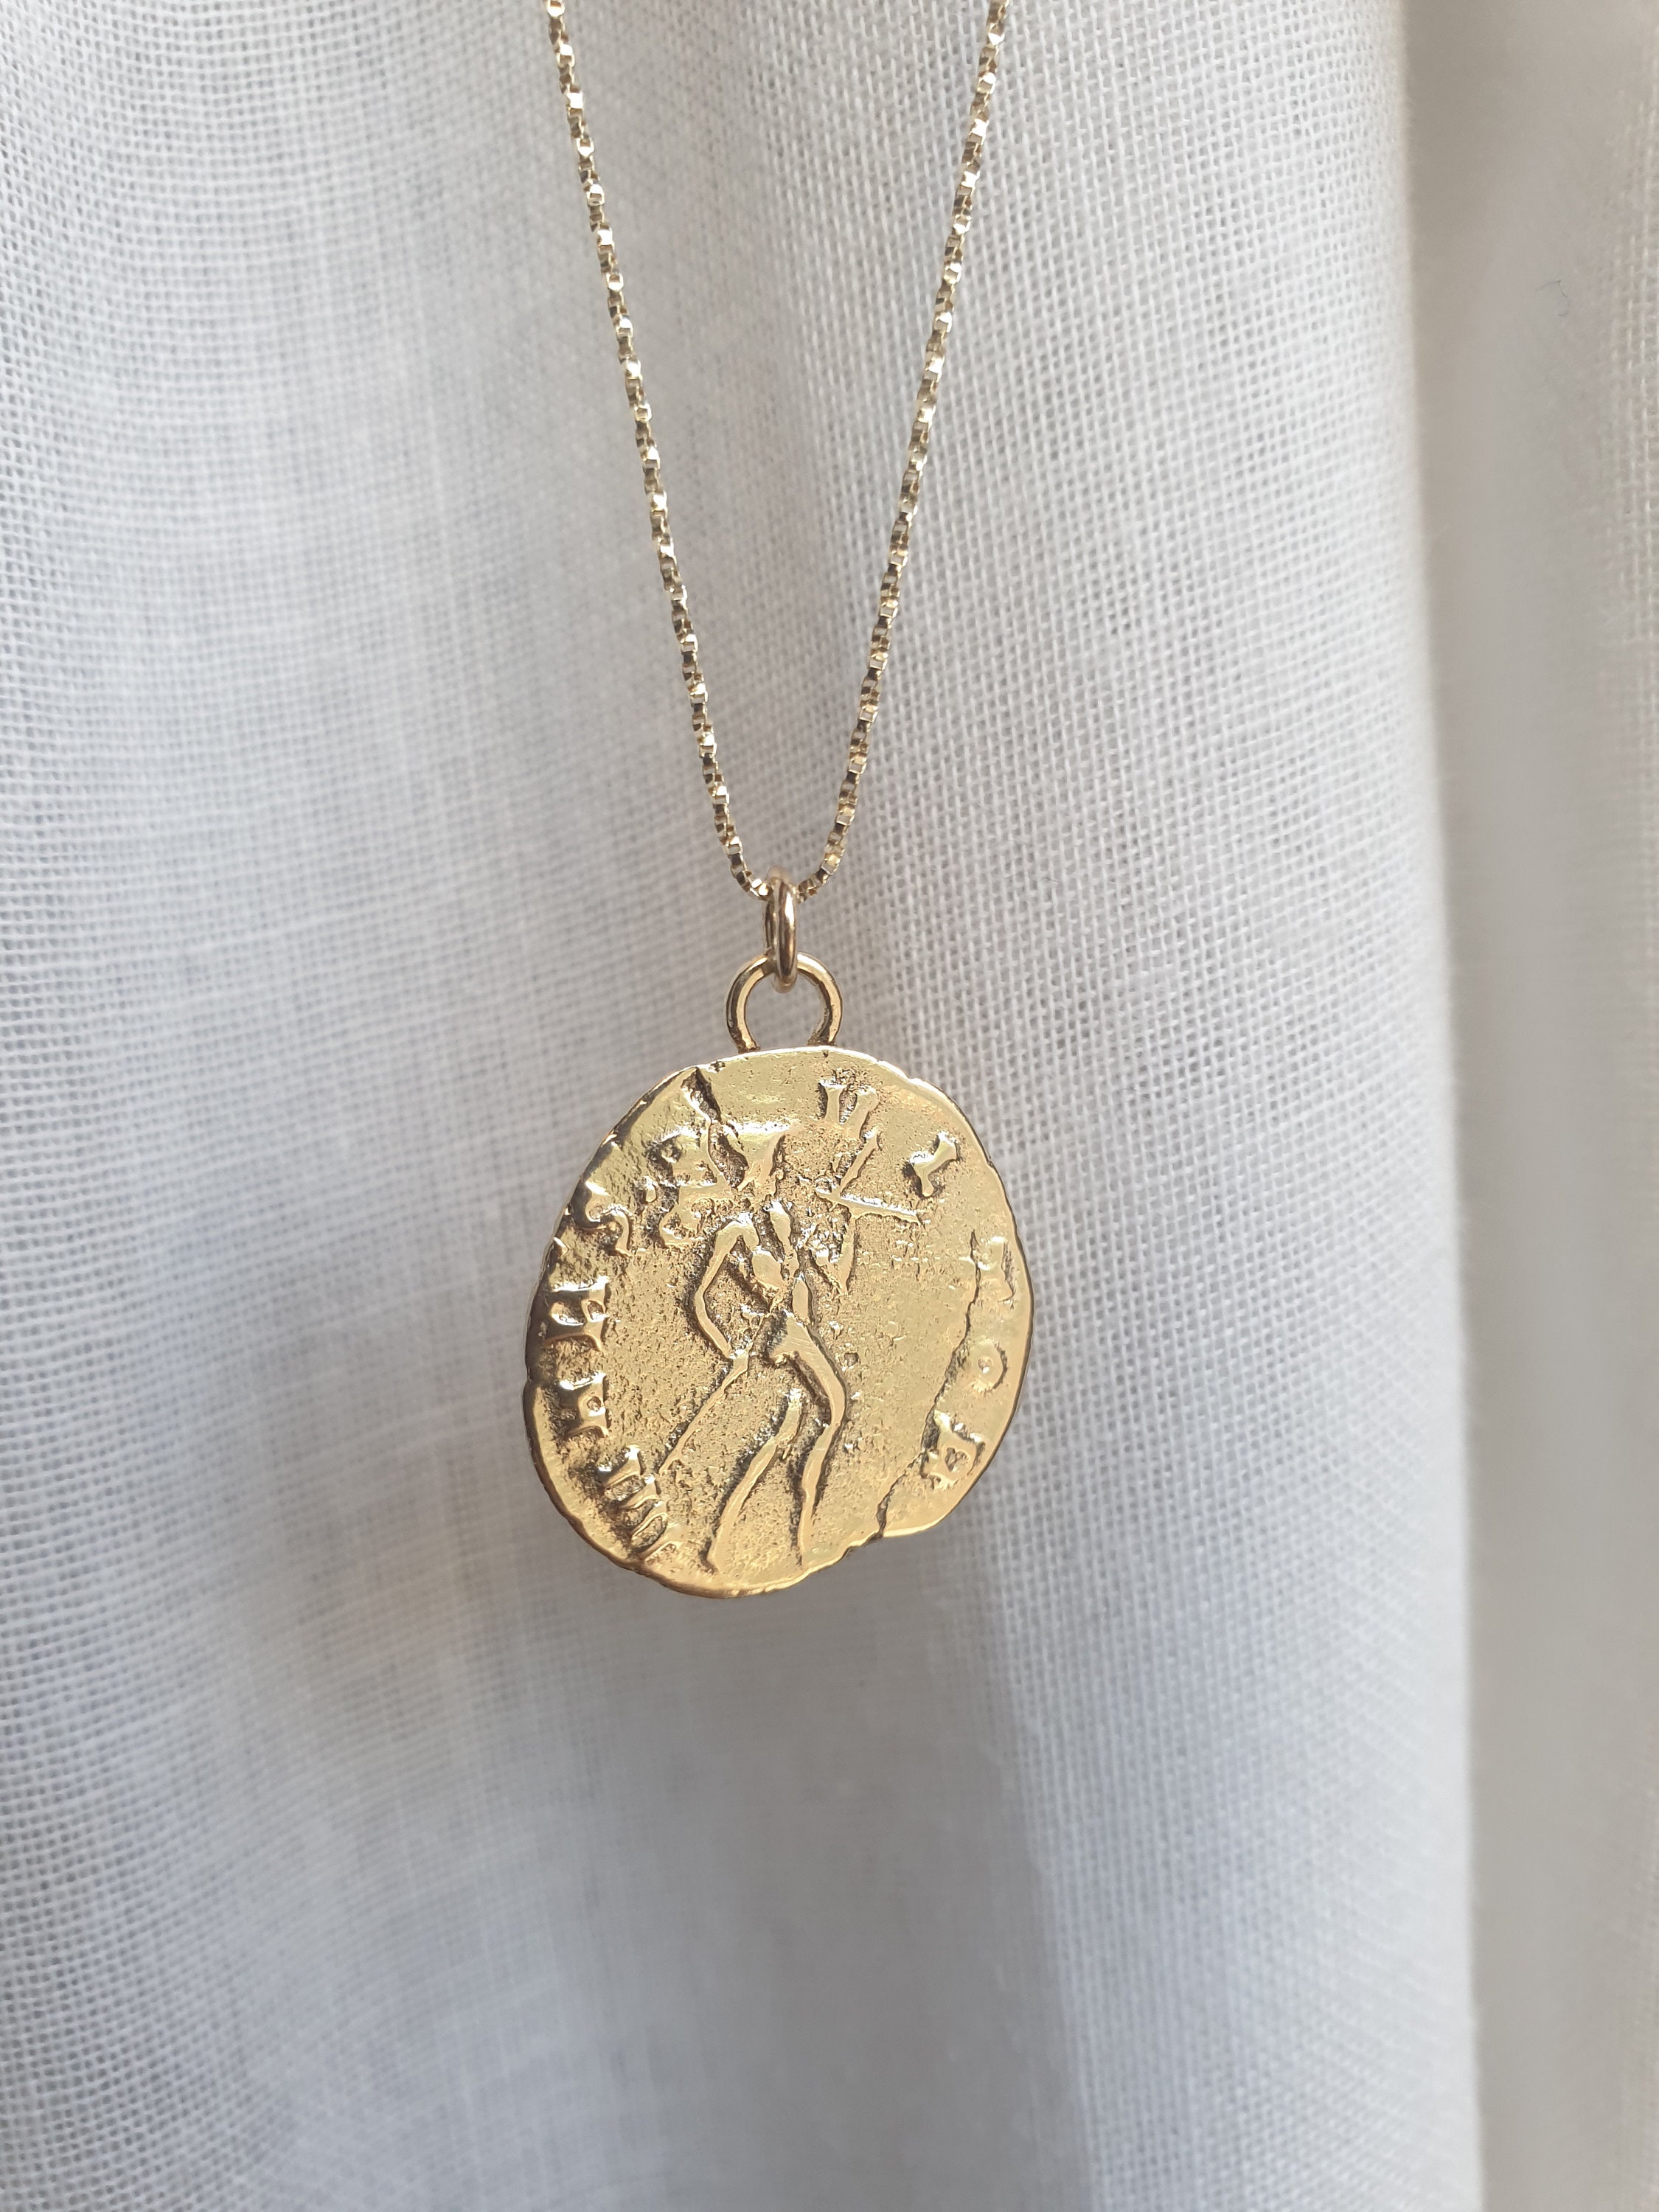 Thick Gold Herringbone Chain/ Turkish Coin Necklace Set / Gold Coin Necklace  / Layered Necklace / 18k Gold Disc Necklace / Everyday Jewelry - Etsy | Gold  herringbone chain, Turkish gold jewelry, Gold disc necklace